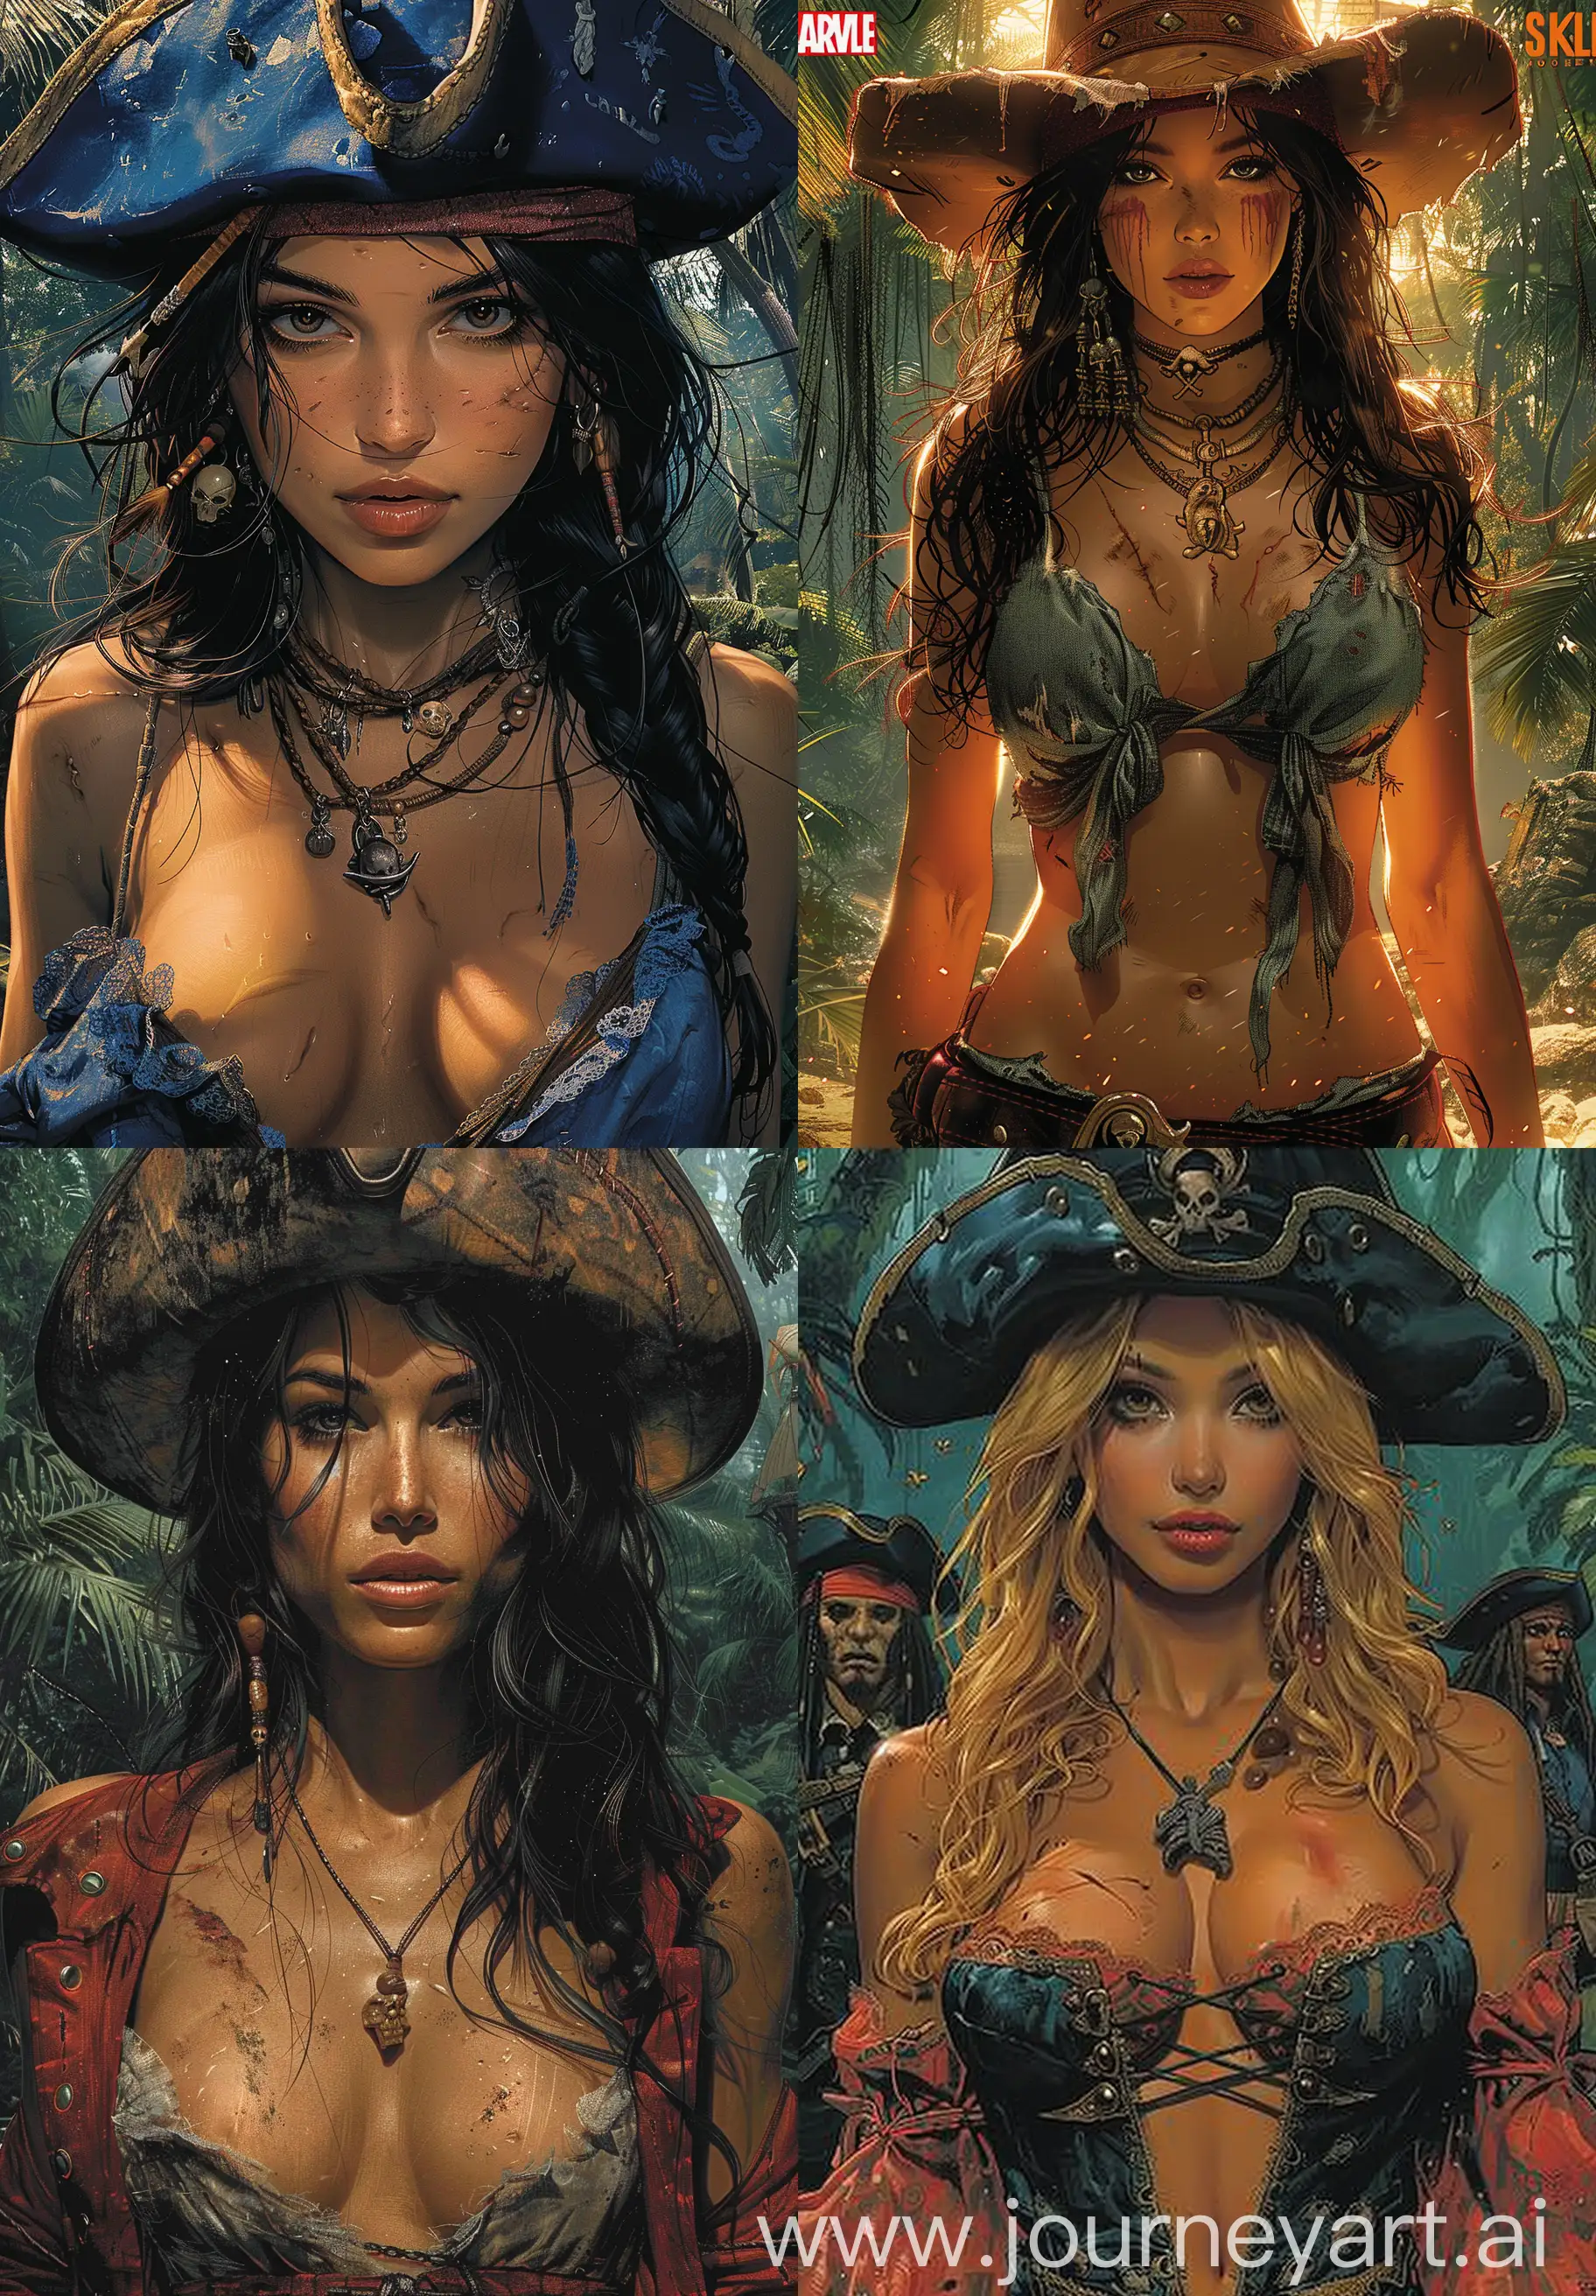 The journey of a pirate gang led by a beautiful and brave female captain to the mysterious Skull Island in search of treasure, intricate details, Jim Lee style, comic book cover style,, --ar 9:13 --v 6.0 --s 750 